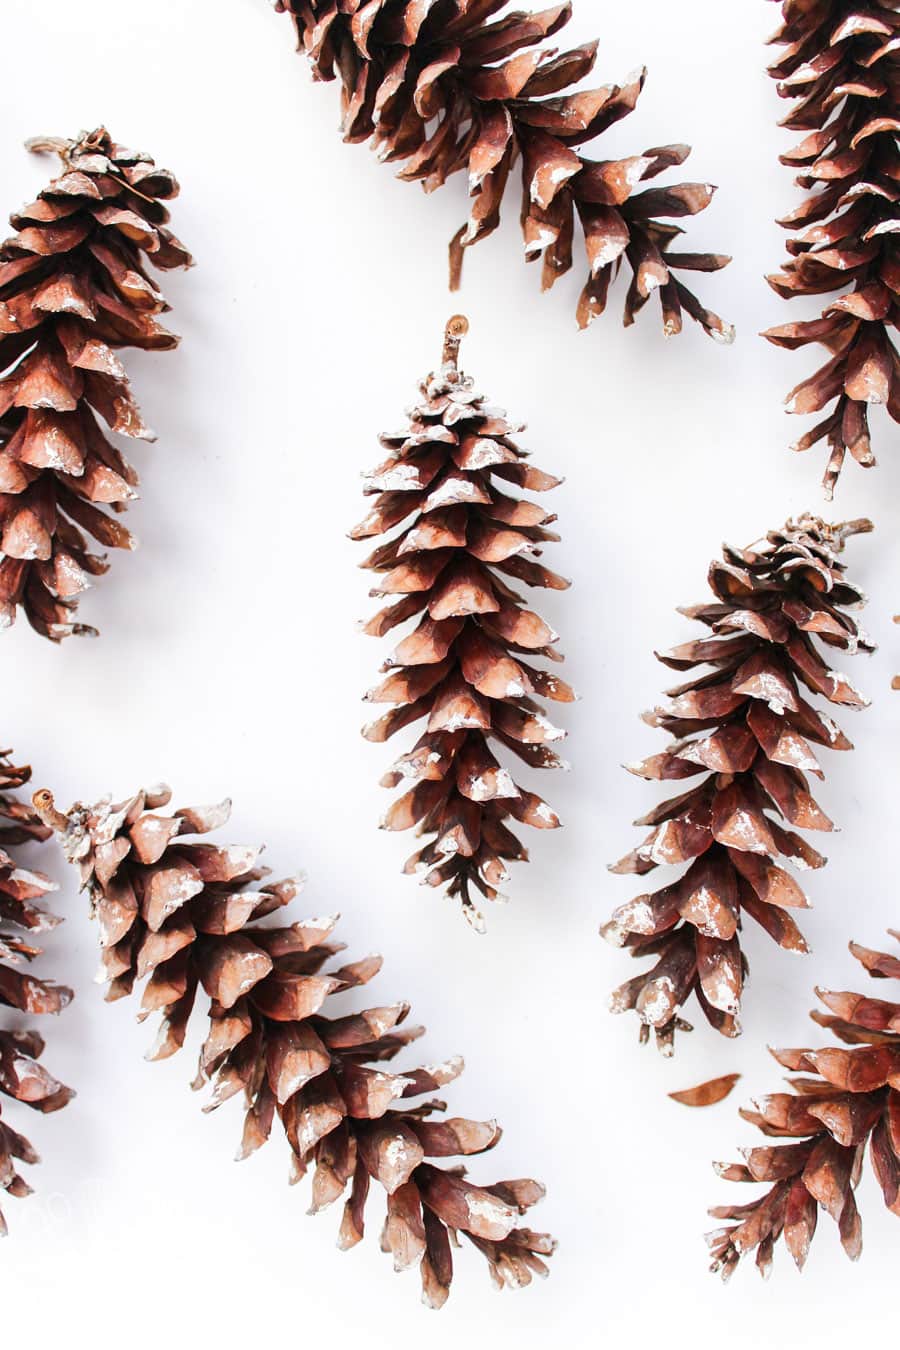 How To Clean and Preserve Pine Cones